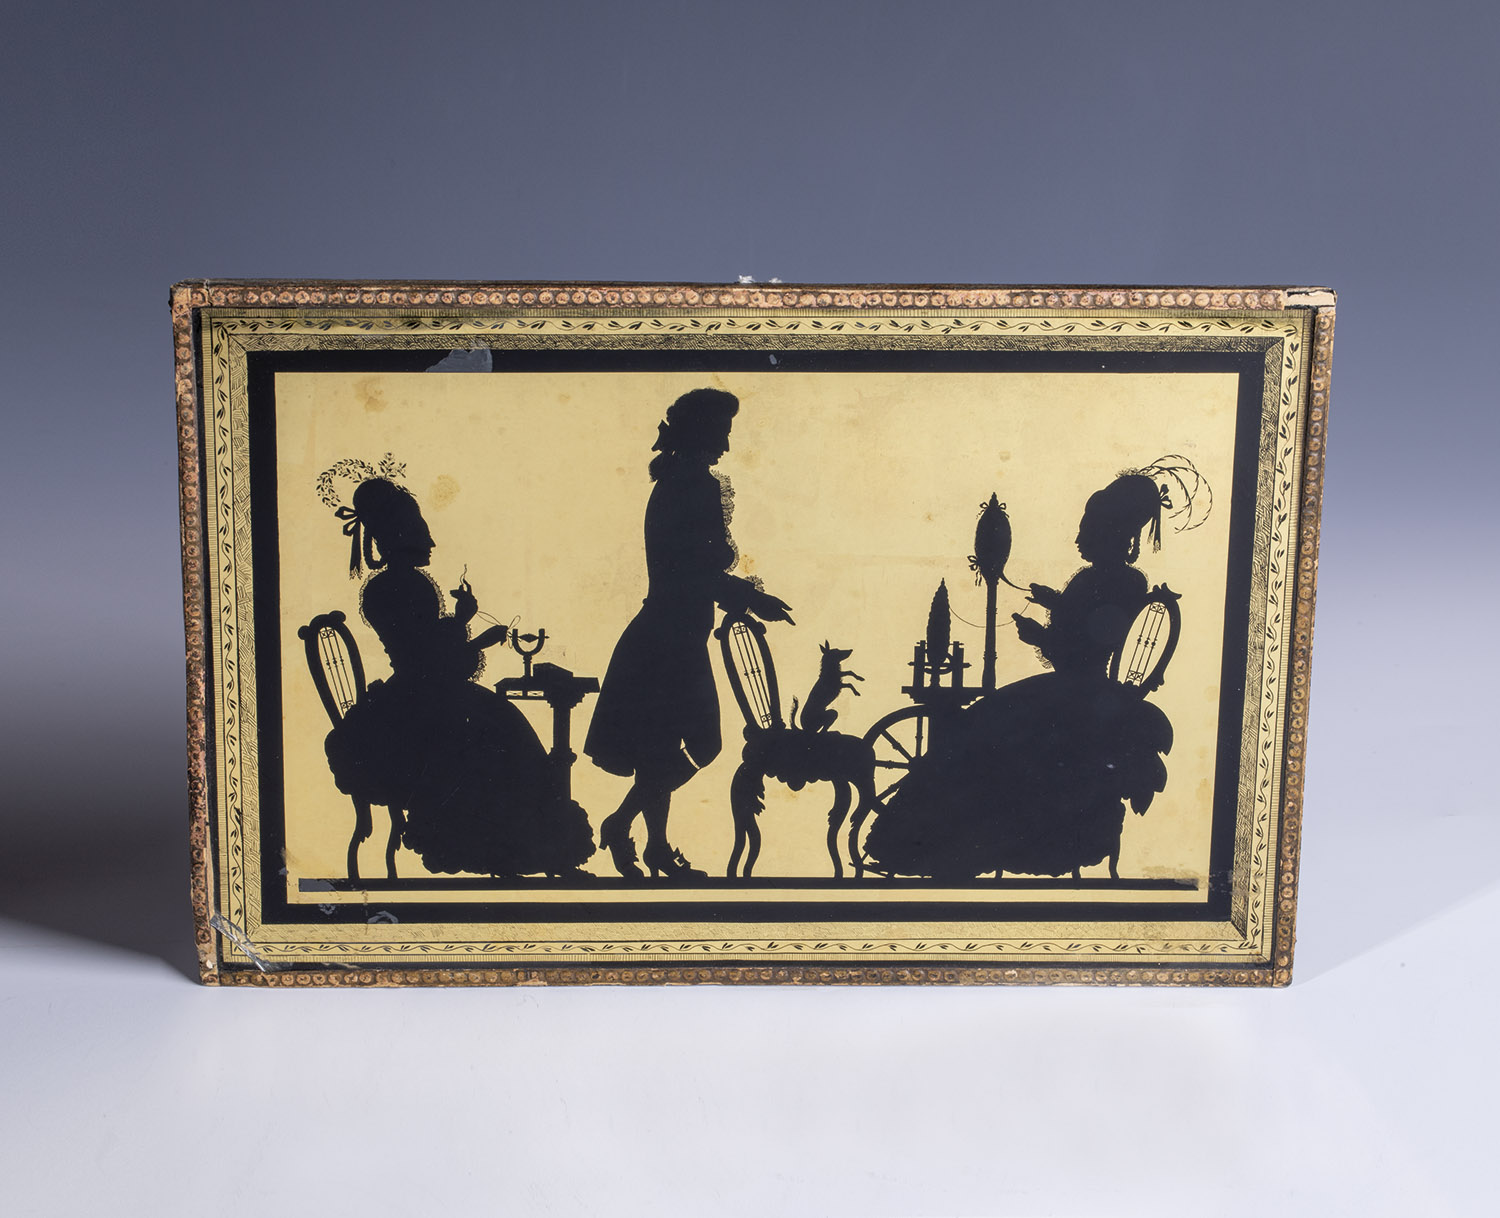 Eglomise painting Around 1800 Eglomise on glass. Two ladies doing needlework, between them A